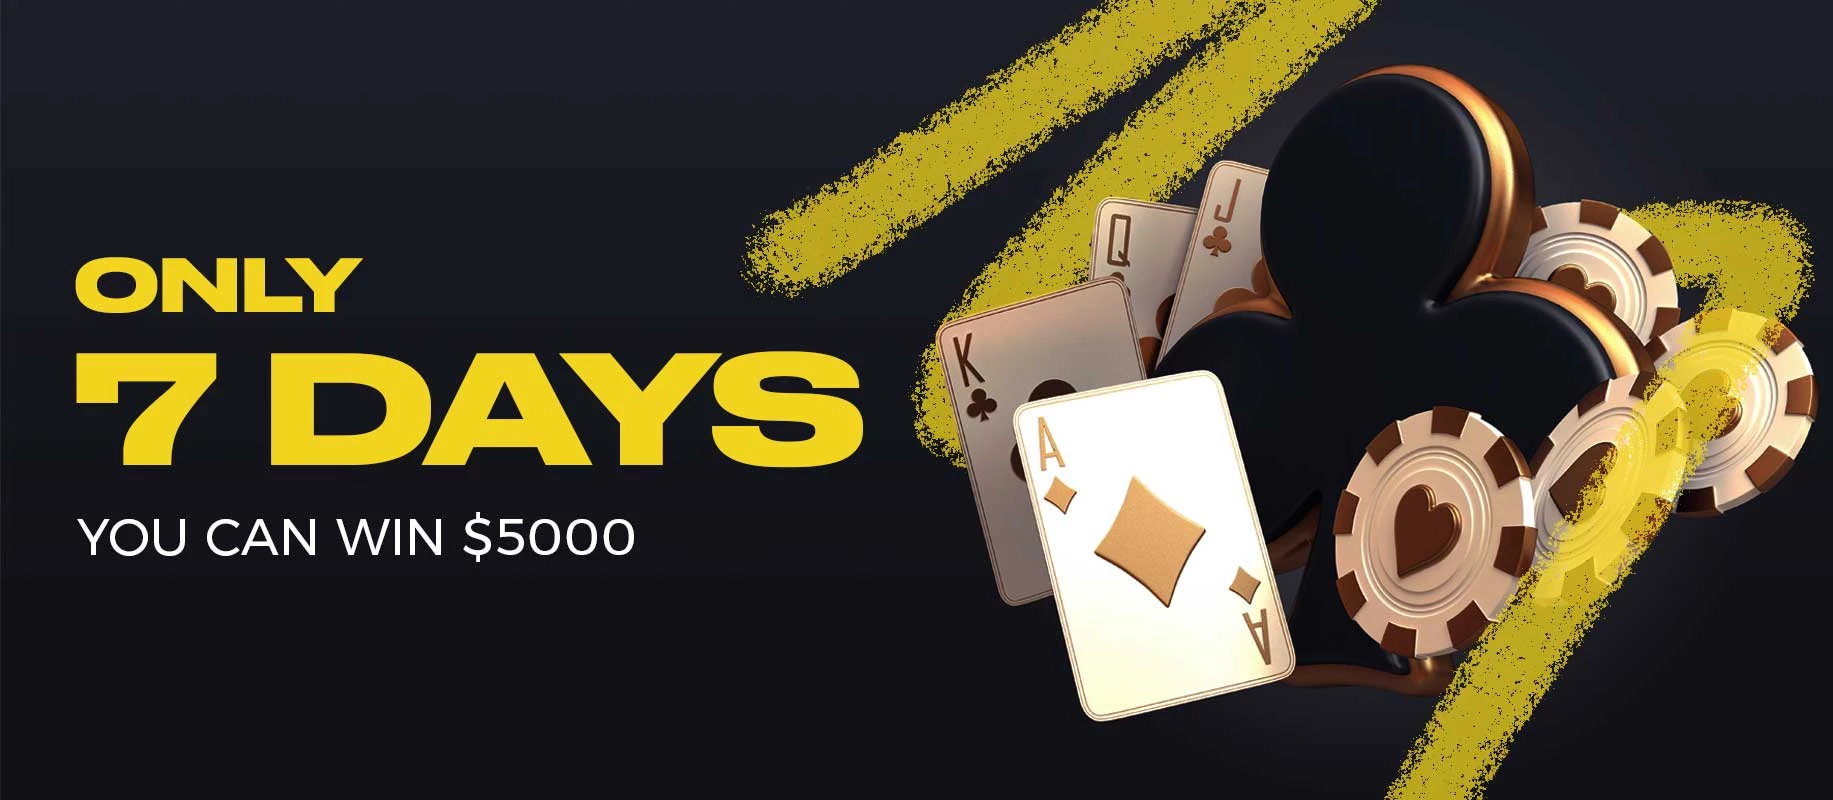 Win 1000 Prizes for 7 Days